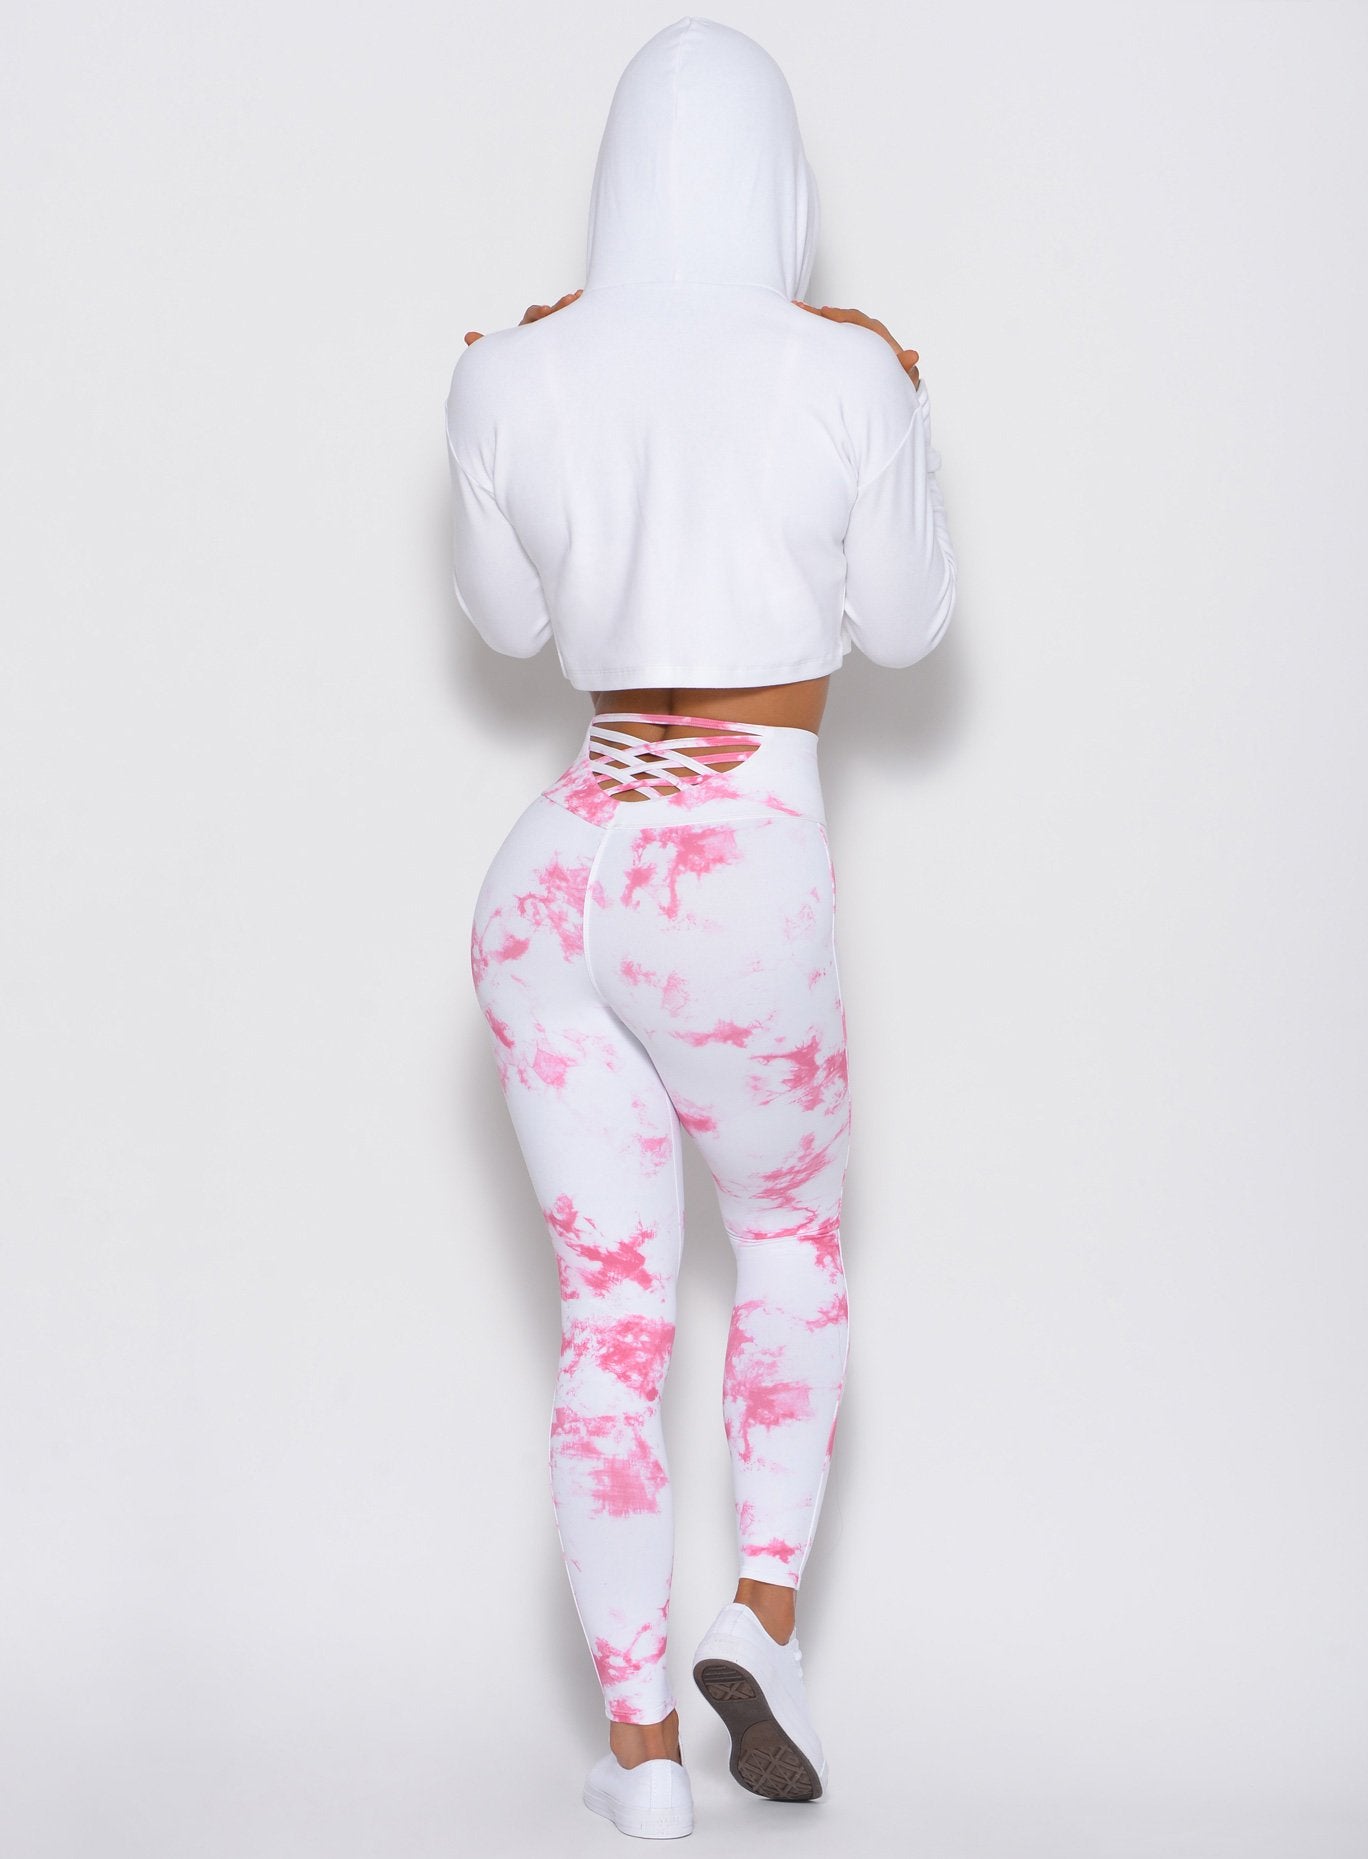 Back profile of the model wearing the Bombshell Crop Hoodie in white color